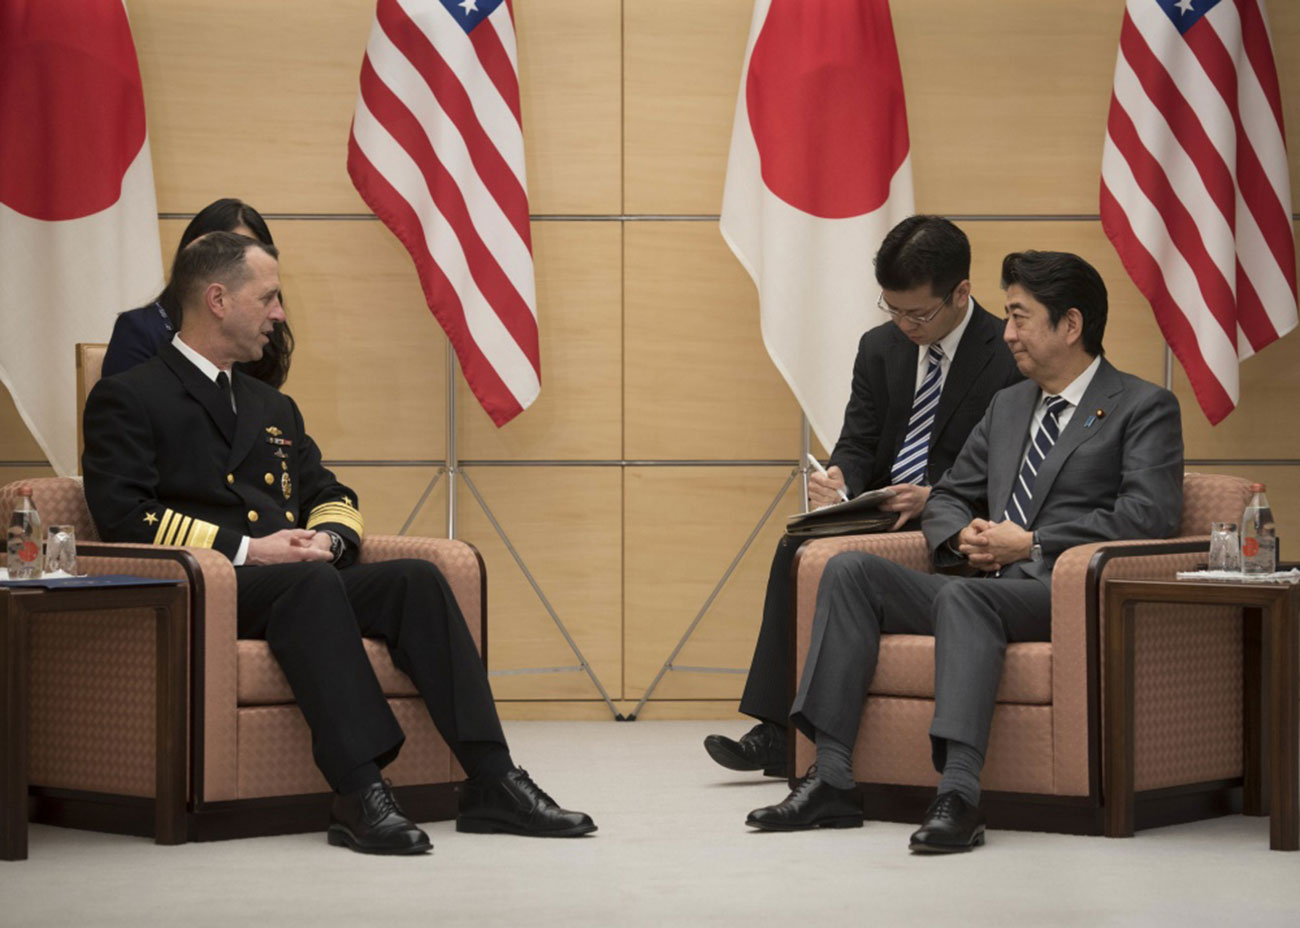 Tokyo, Japan (Jan. 17, 2019) Chief of Naval Operations (CNO) Adm. John Richardson, left, met with Japanese Prime Minister Shinzo Abe to further strengthen military ties between the United States and Japan. Richardson reaffirmed the U.S. Navy™s commitment to maintaining security cooperation with the Japan Maritime Self-Defense Force (JMSDF) and broadening and strengthening global maritime awareness and access with Japan and the region. The U.S. Navy and the JMSDF routinely conduct combined maritime exercises and operate together to promote peace and security in the Indo-Pacific region -- U.S. Navy photo by Chief MCS Elliott Fabrizio. -